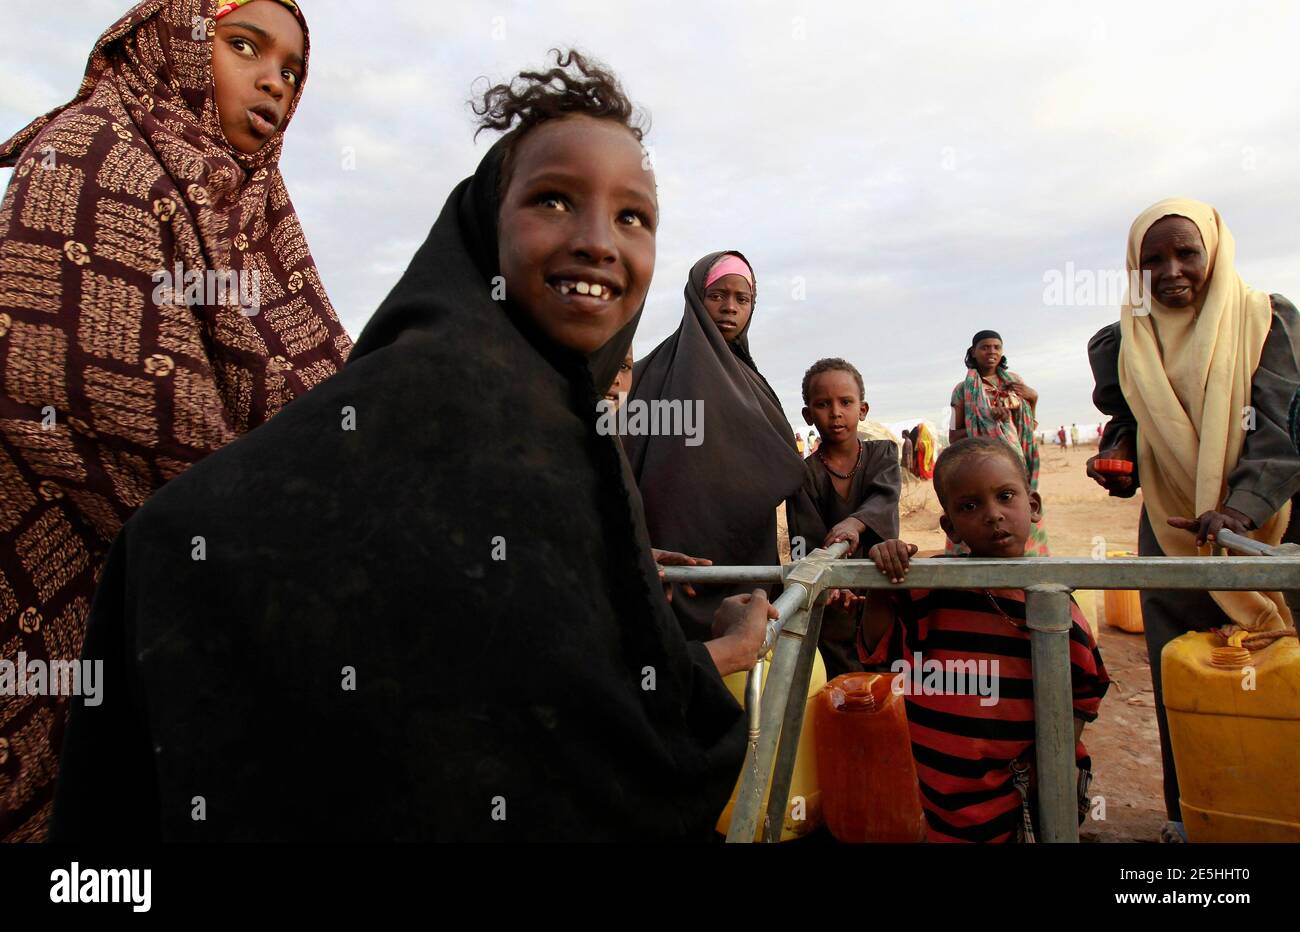 Somali refugee girls collect water from a tank at the Ifo extension refugee camp in Dadaab, near the Kenya-Somalia border, July 31, 2011. The whole of drought- and conflict-wracked southern Somalia is heading into famine as the Horn of Africa food crisis deepens, the United Nations said. REUTERS/Thomas Mukoya (KENYA - Tags: SOCIETY CIVIL UNREST DISASTER ENVIRONMENT) Stock Photo